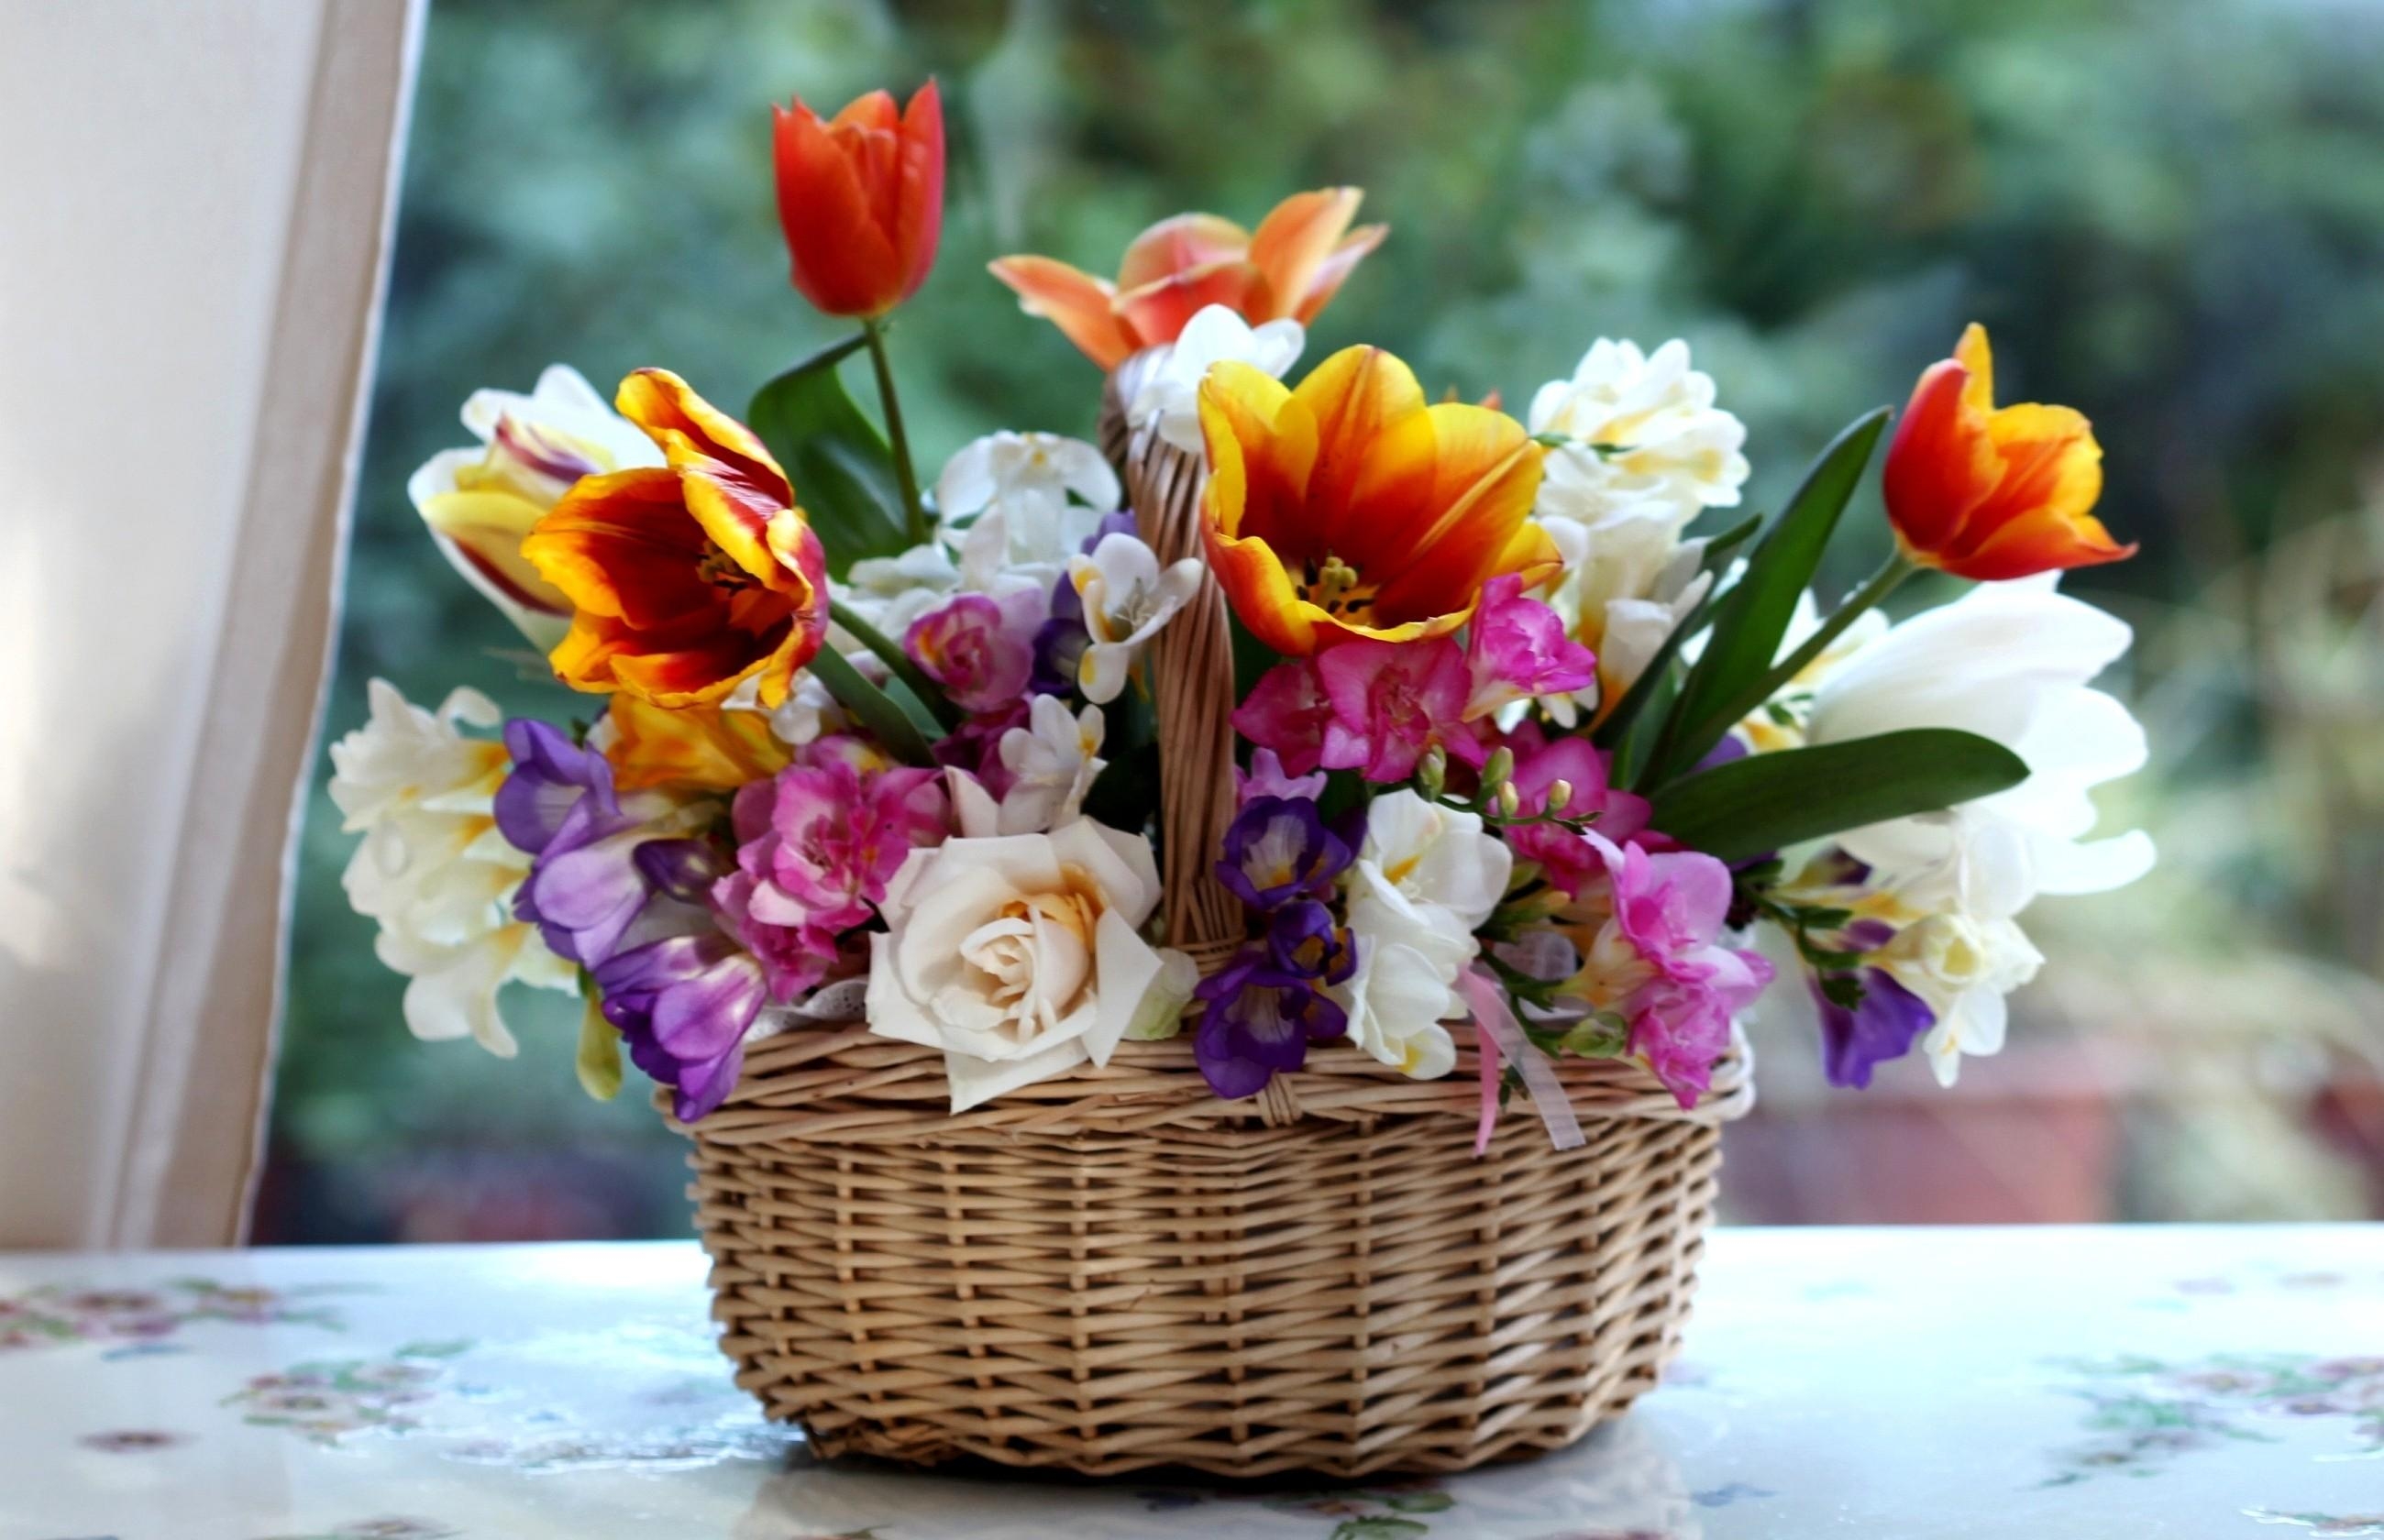 flowers, roses, tulips, basket, composition, combination, freesia